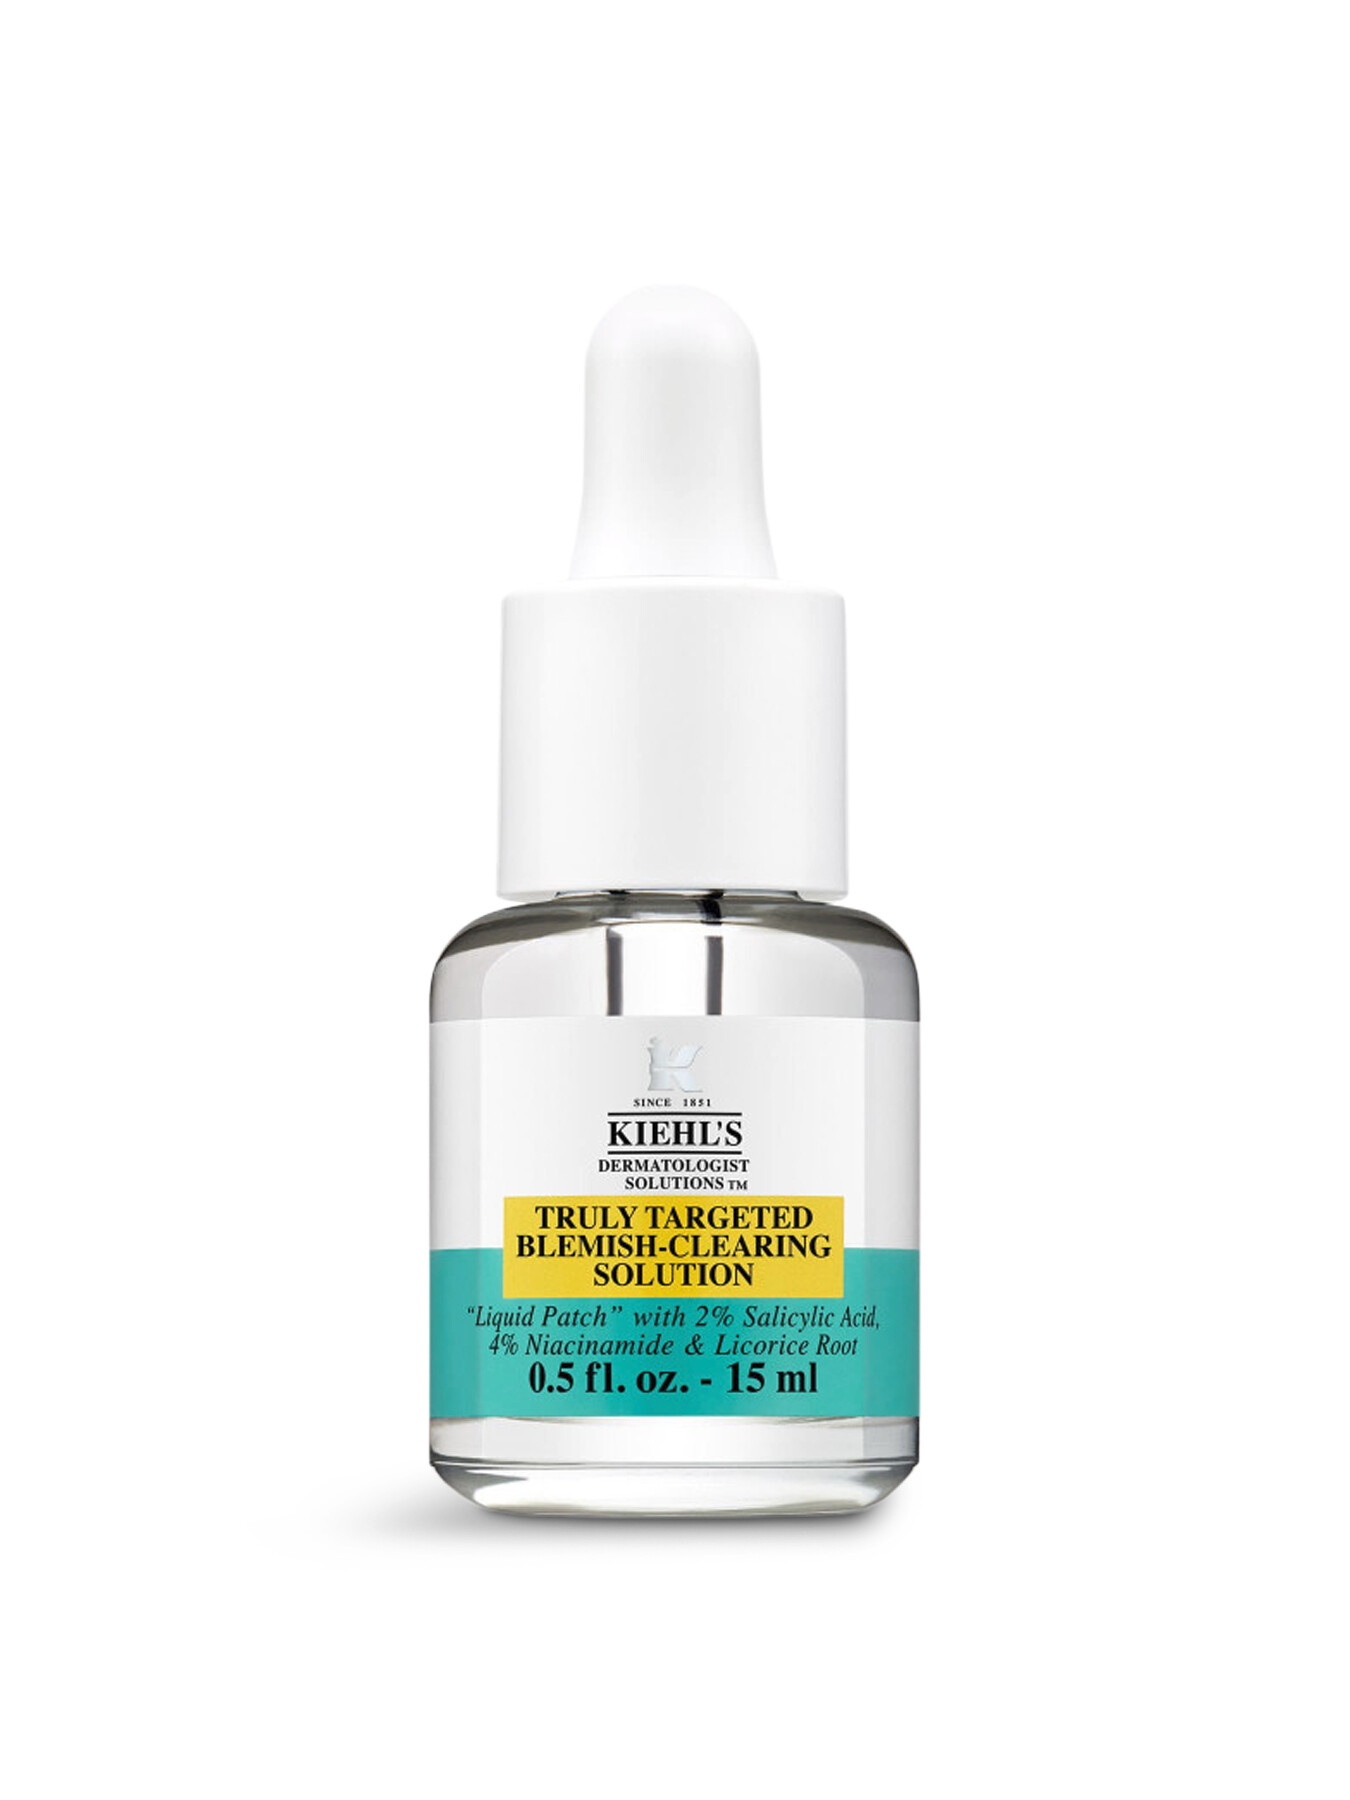 Kiehls Truly Targeted Blemish-clearing Solution 15ml In White